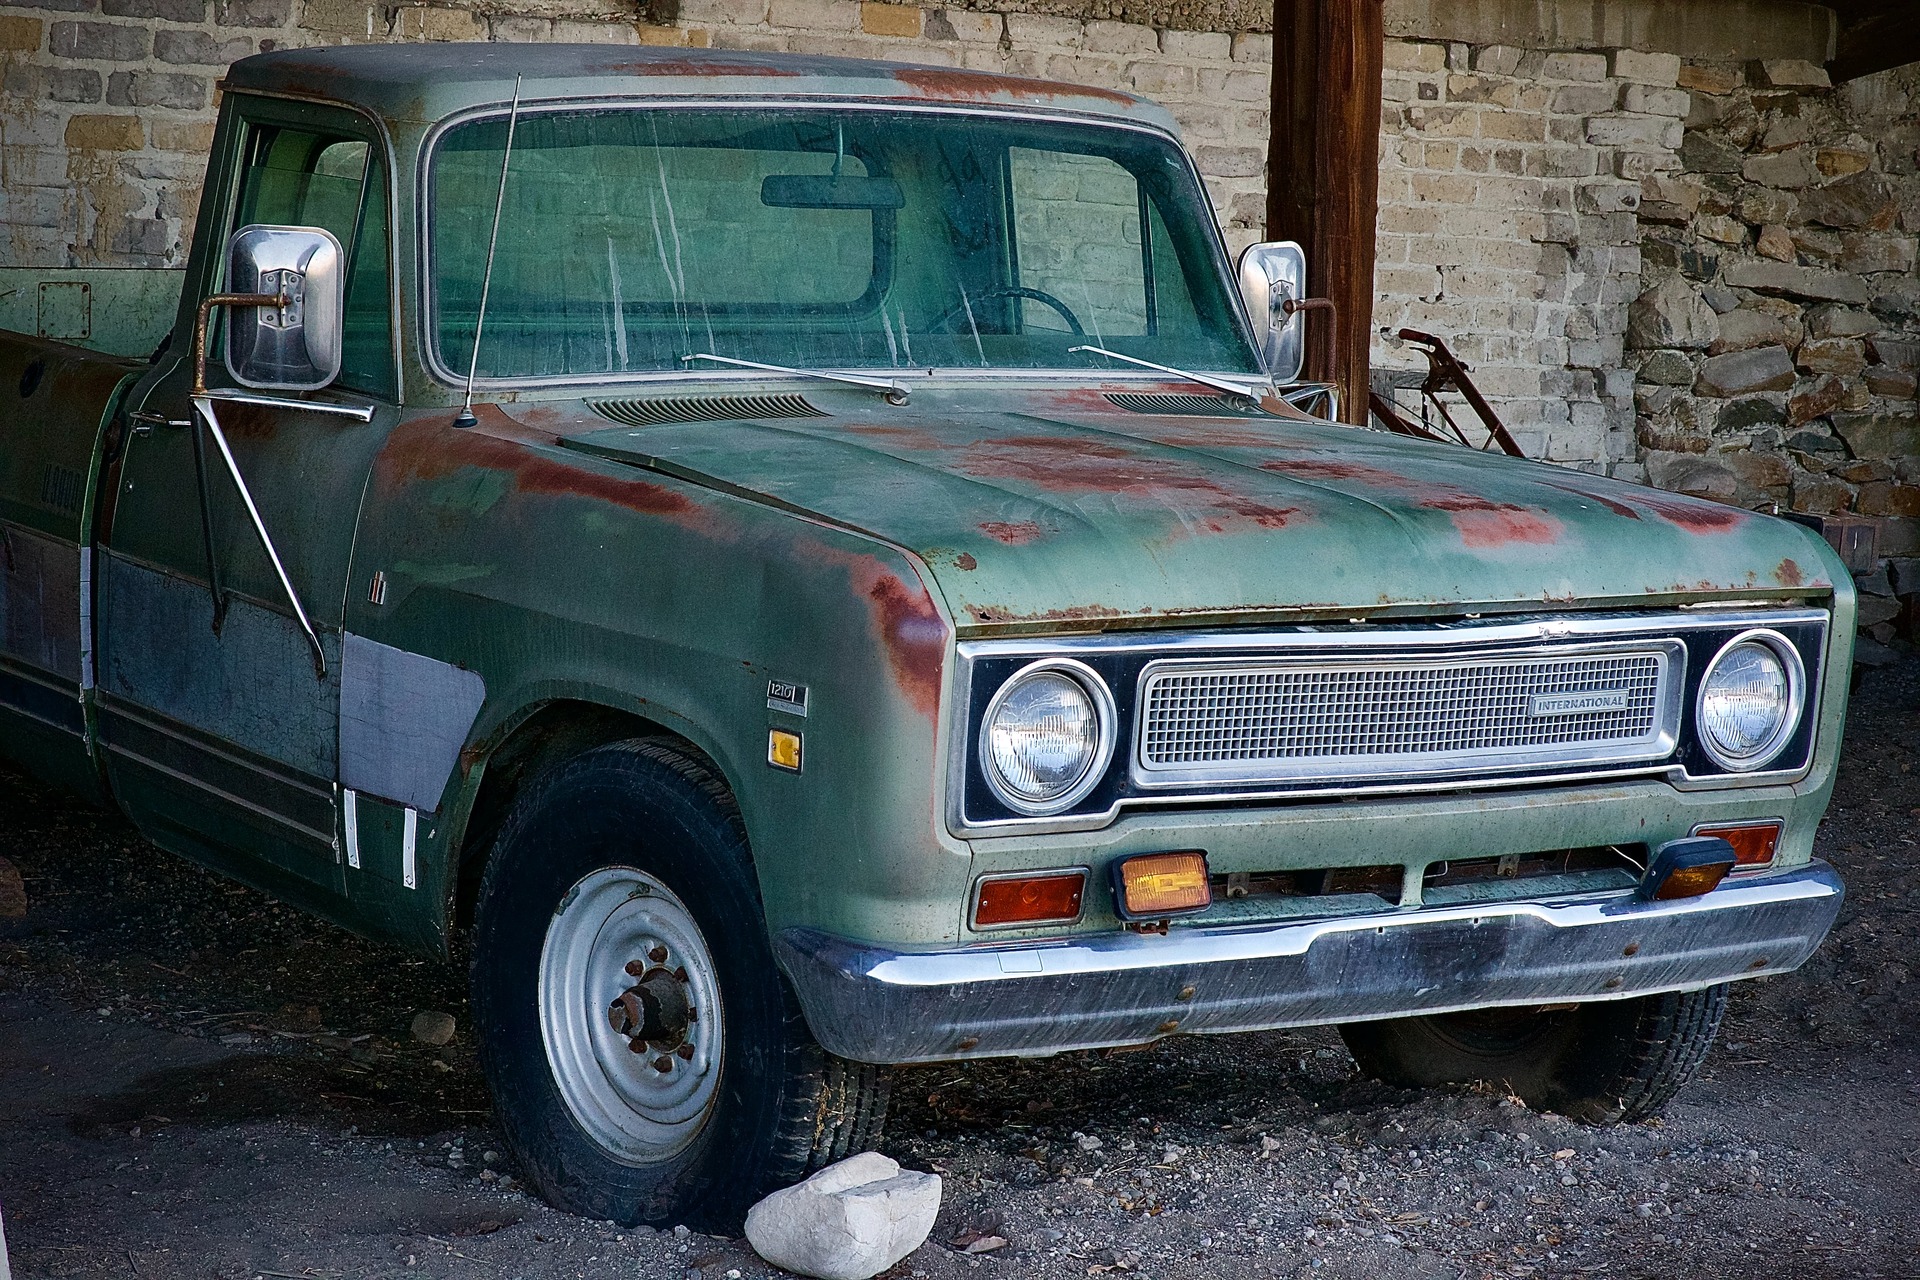 An old pickup truck in need of restoration